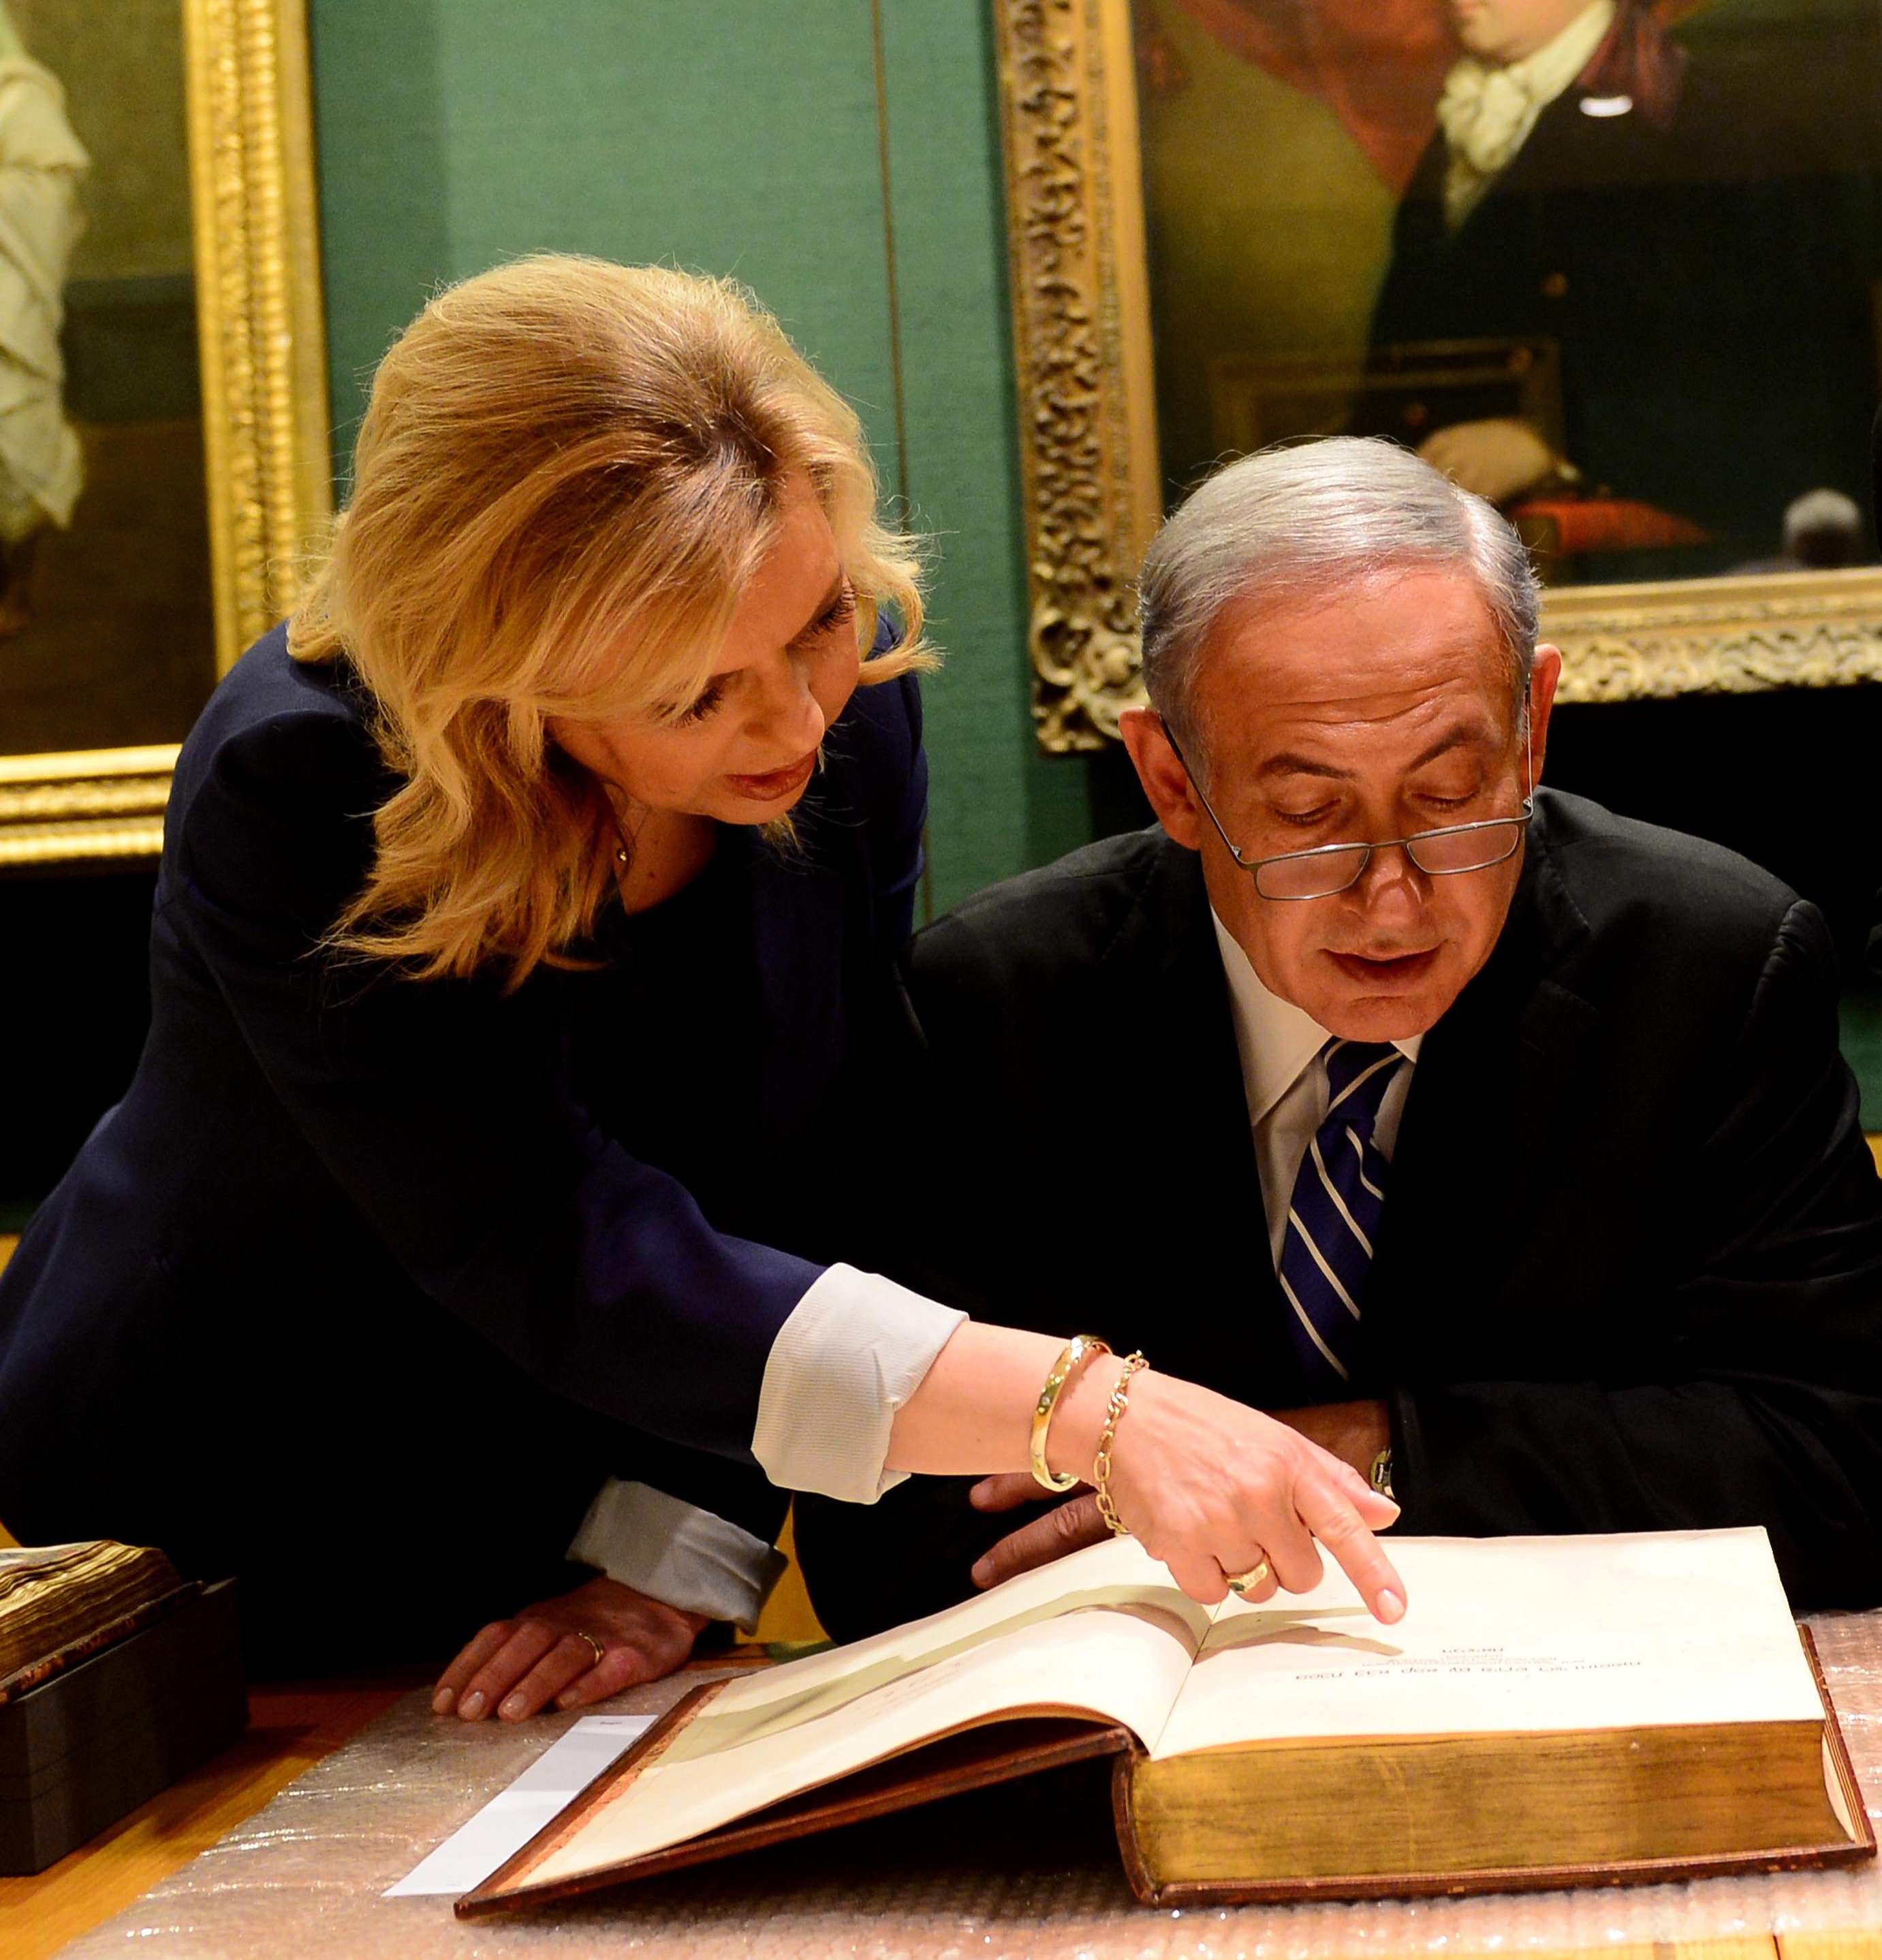 PM Netanyahu with his wife Sara at the National Library in London, they were shown the original Balfour Declaration (dated 2 November 1917) (Photo bi Avi Ohayon/GPO) 